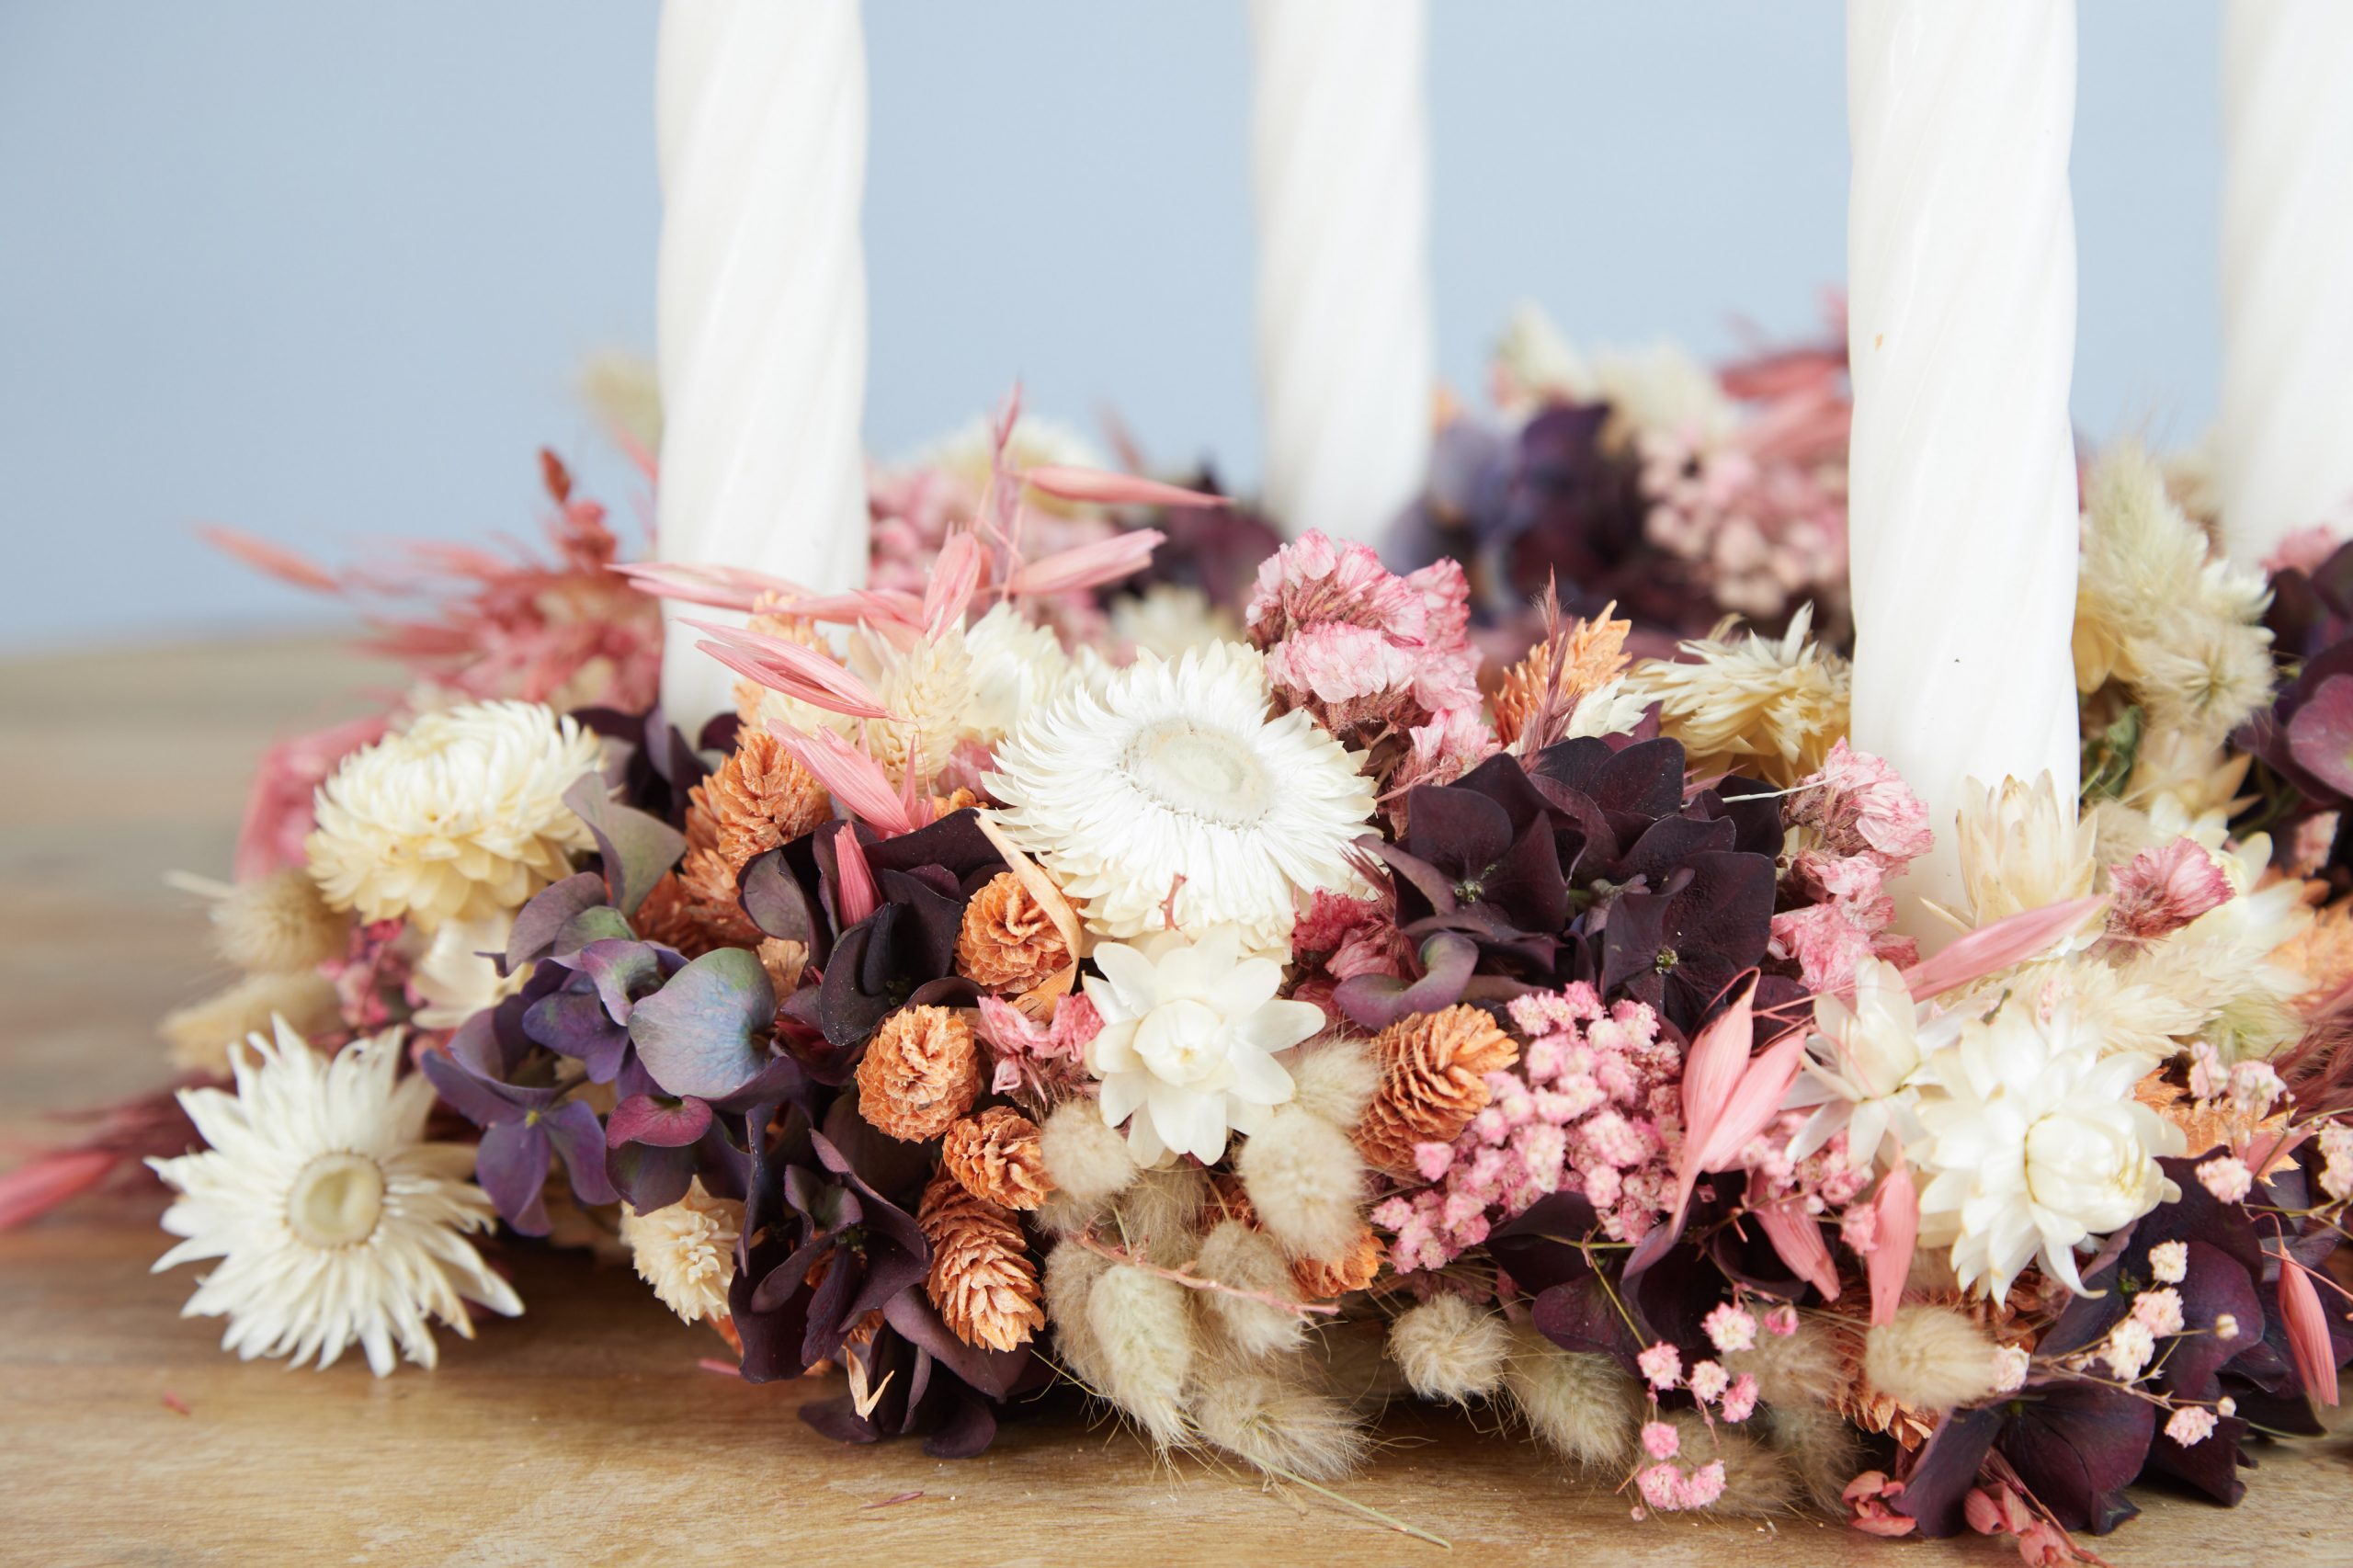 Advent wreath made of dried flowers - 